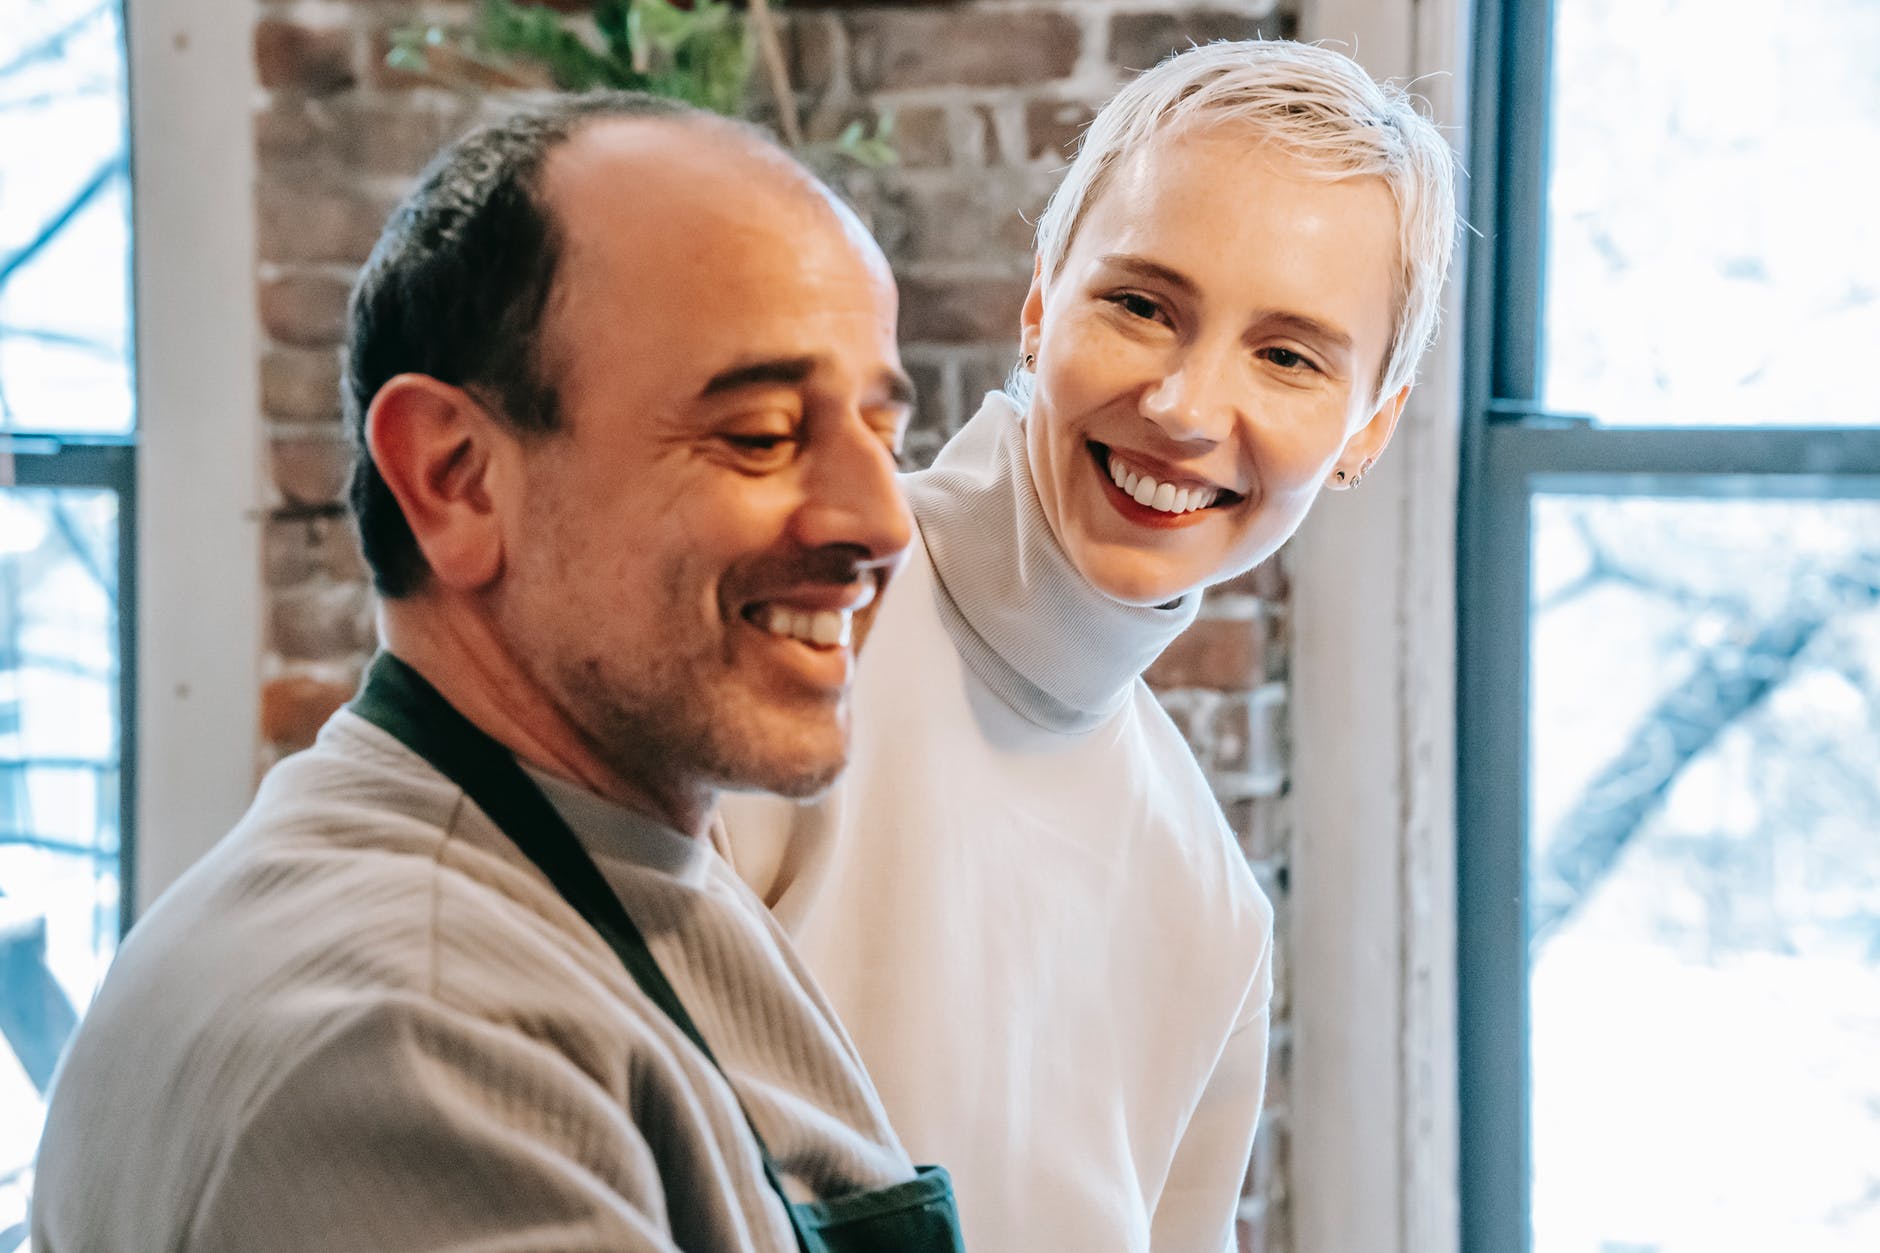 A woman smiling at a smiling man beside her. | Source: Pexels